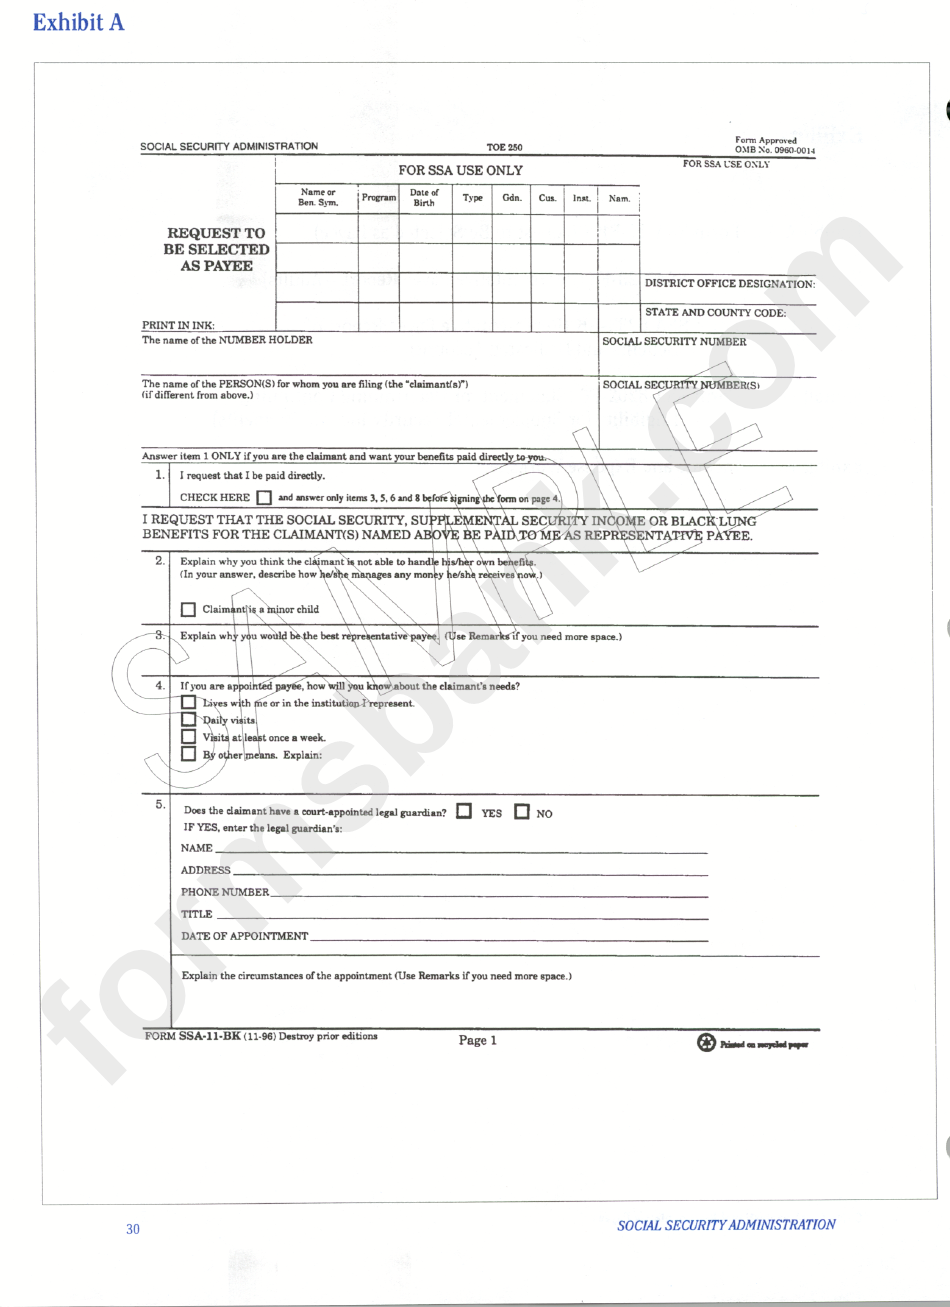 Form Ssa-11-Bk - Request To Be Selected As Payee - Social Security Administration